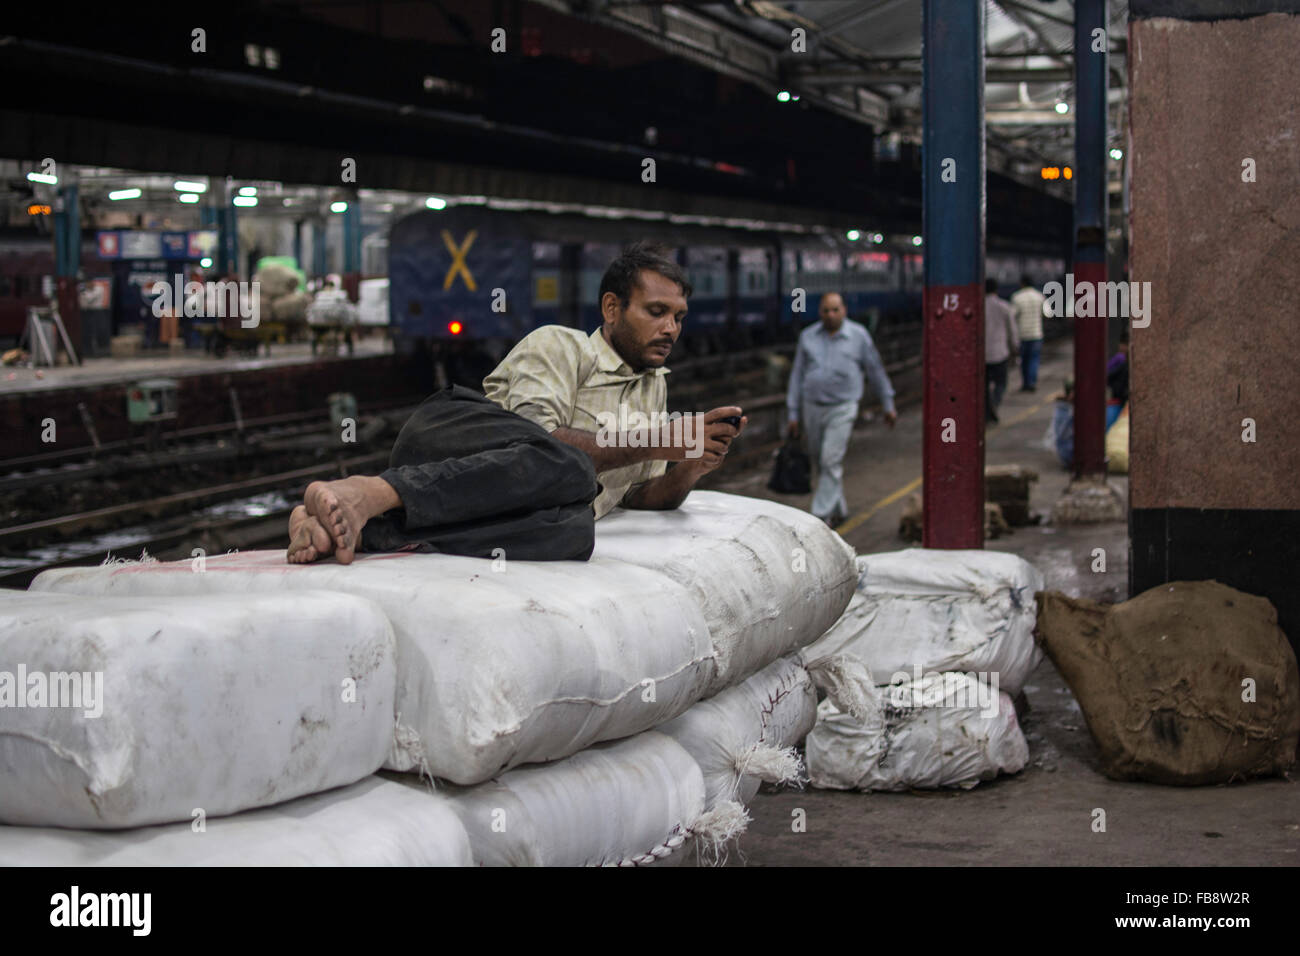 Passengers sleeping or waiting for the train in railway station. Indian Railways, India. Stock Photo